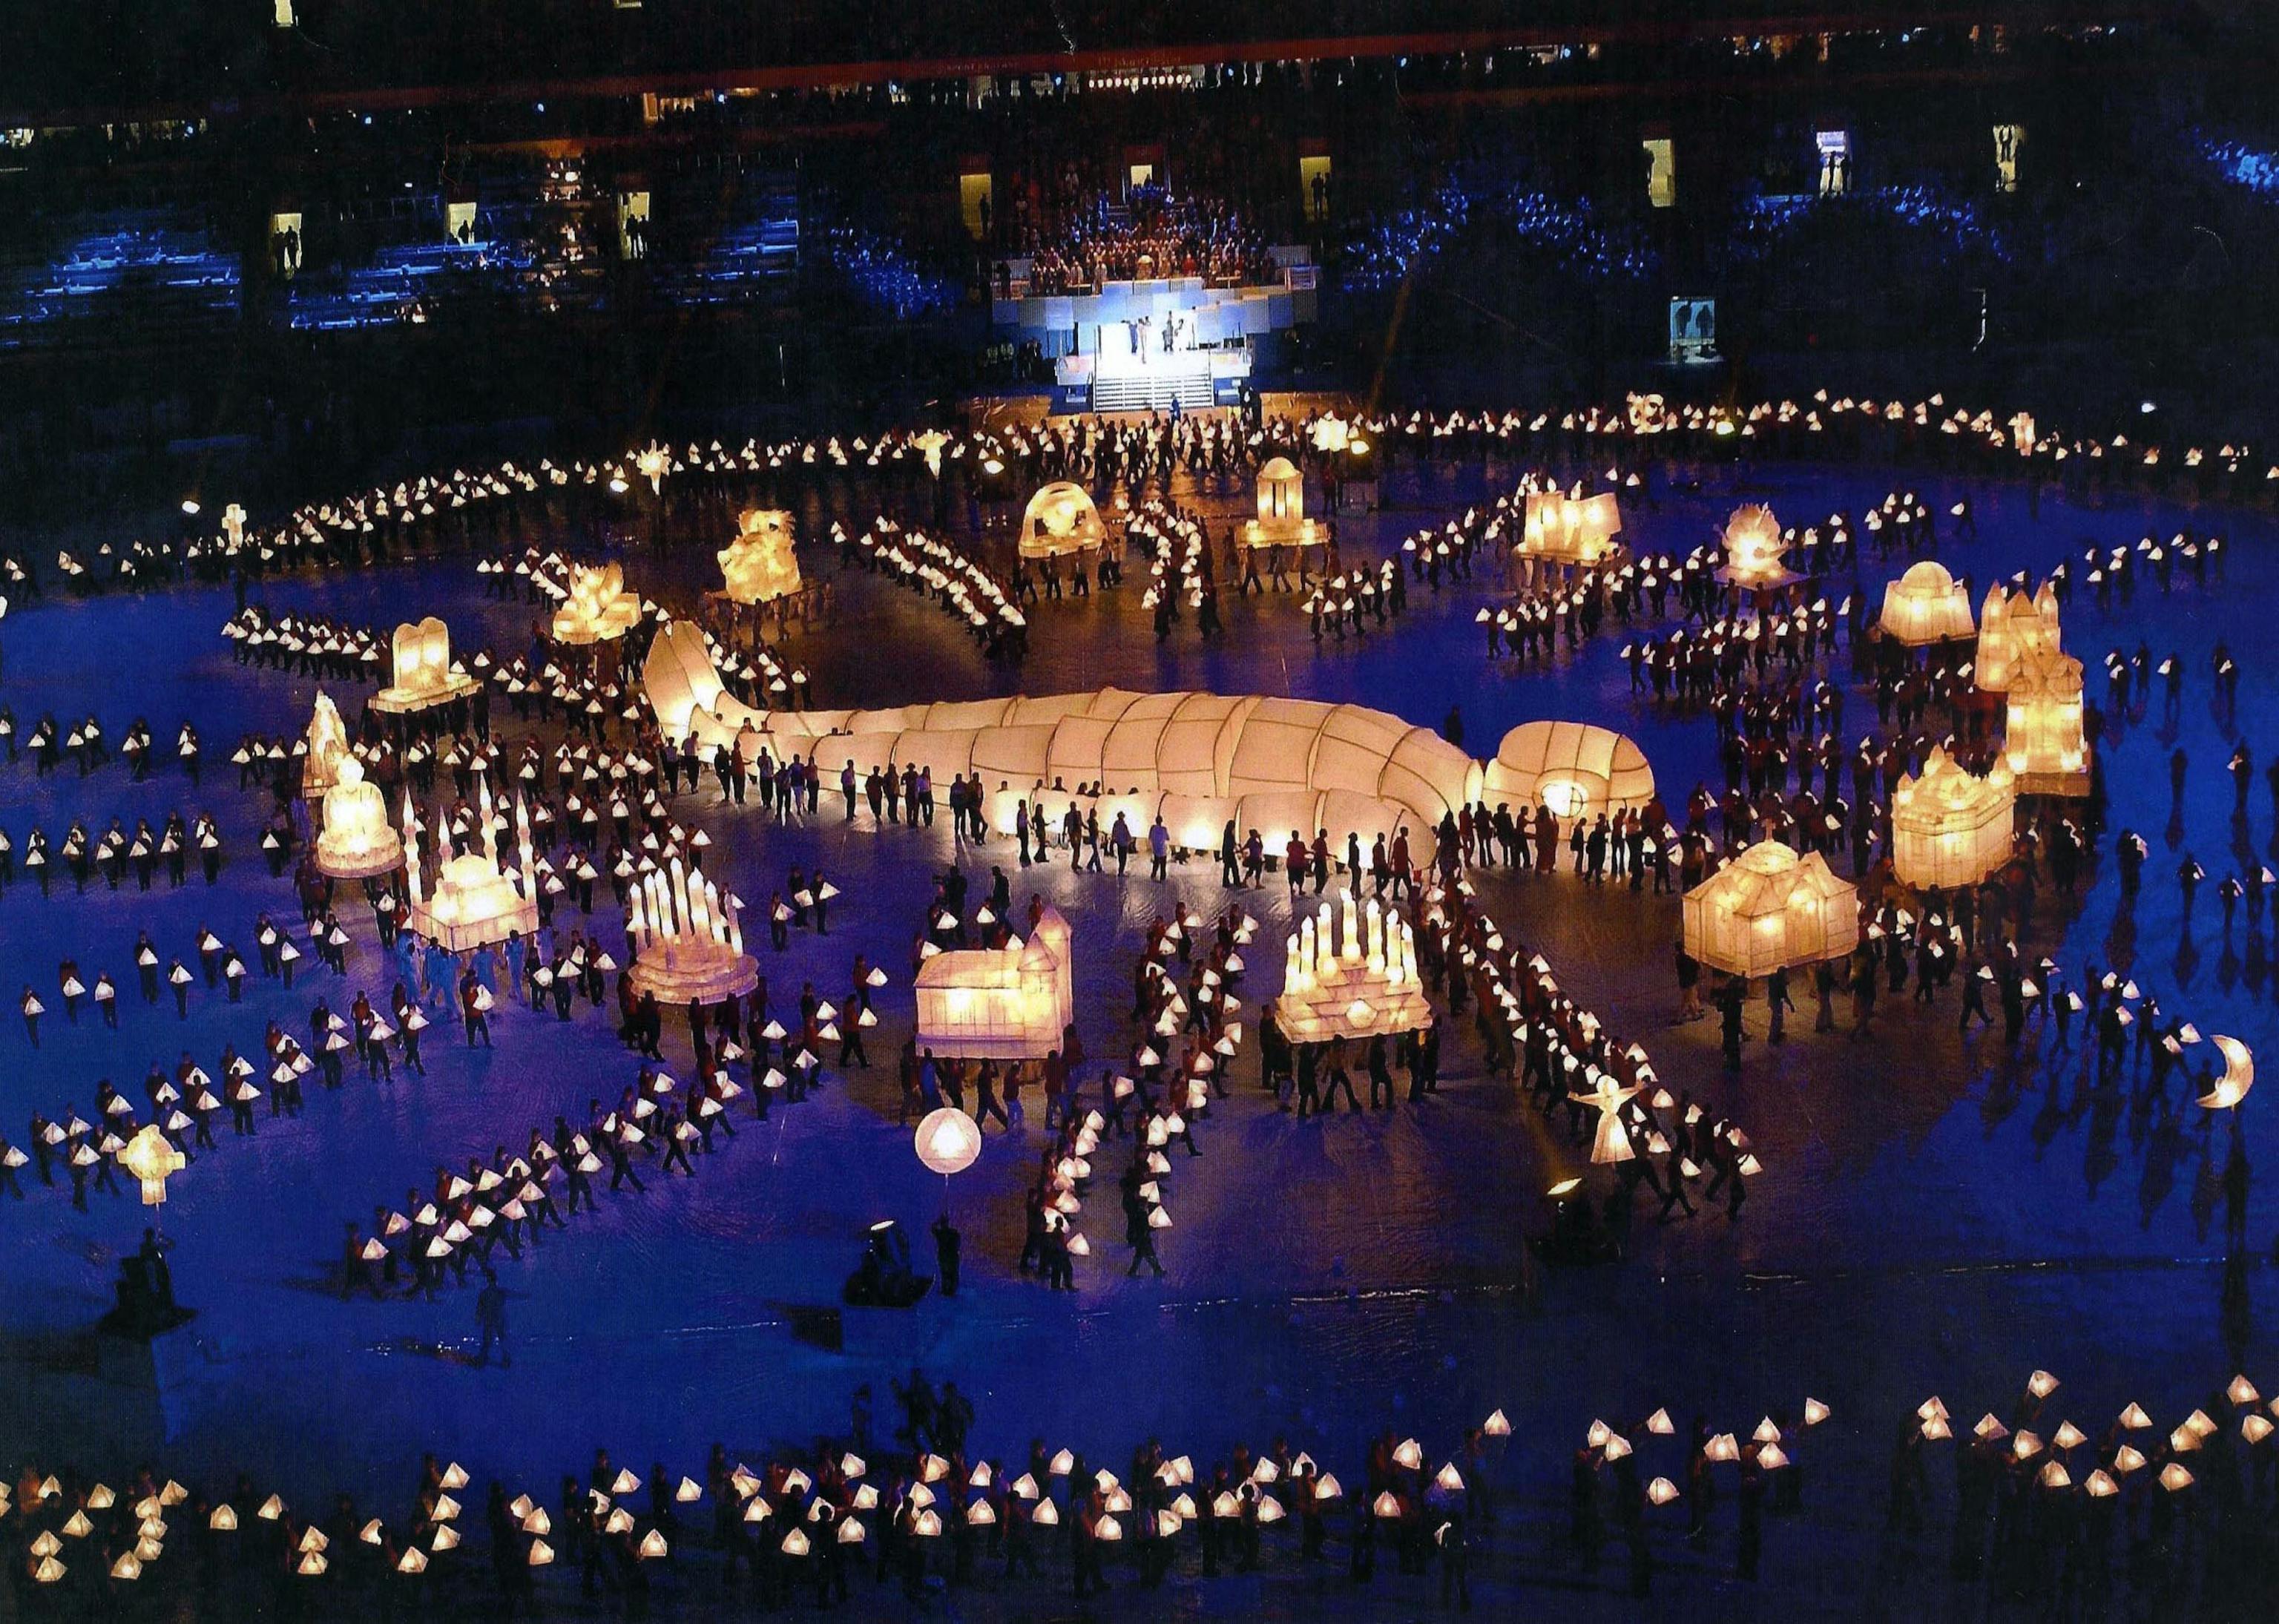 A large lantern shaped like a person lying in the centre of an arena and surrounded by hundreds of tiny dots of light, each a person holding a lantern